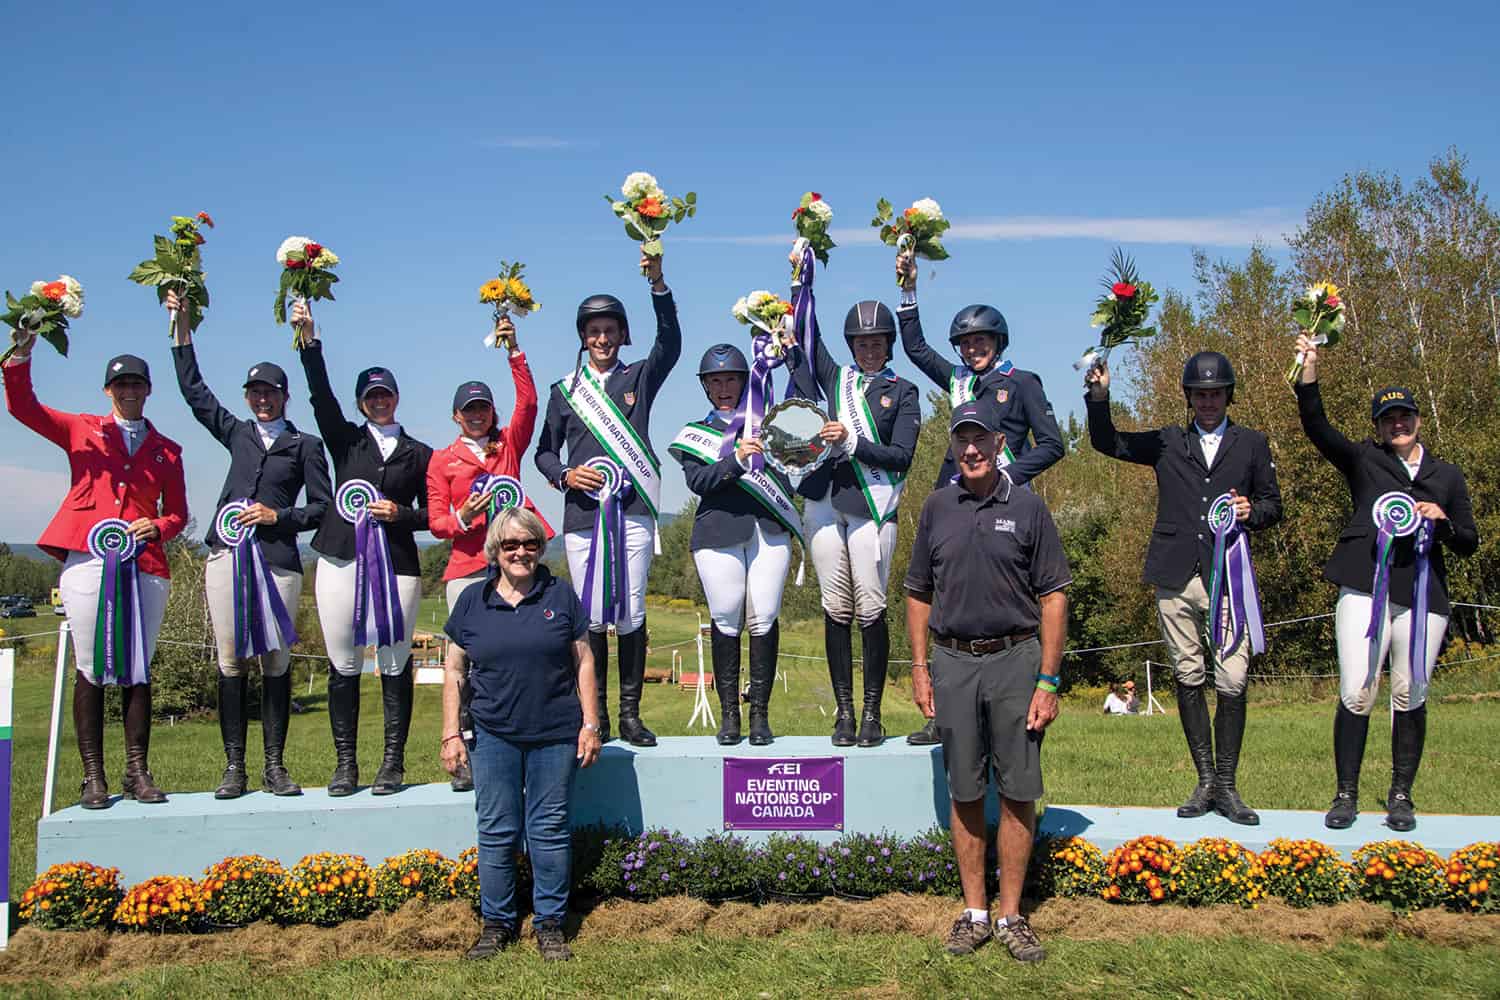 Land Rover U.S. Eventing Team Wins Gold at 2022 FEI Eventing Nations Cup™ at Bromont CCI